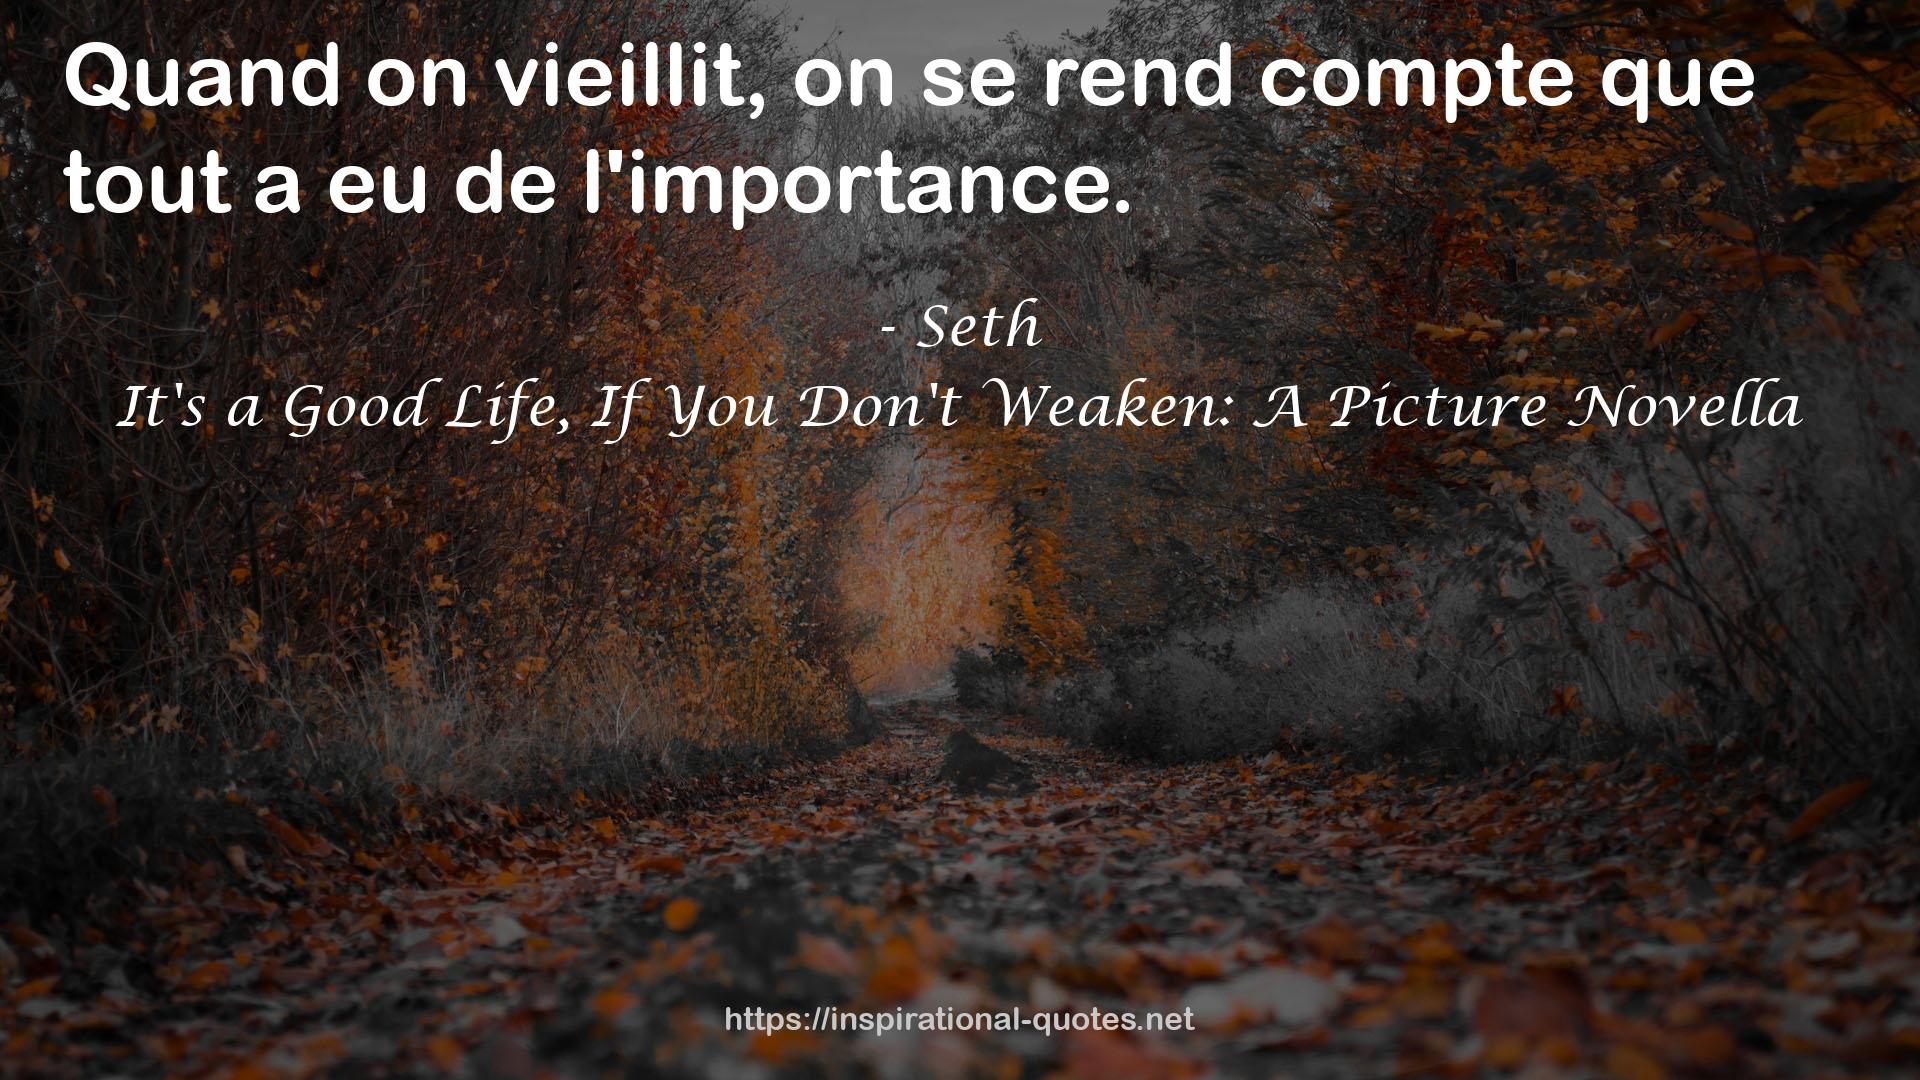 It's a Good Life, If You Don't Weaken: A Picture Novella QUOTES